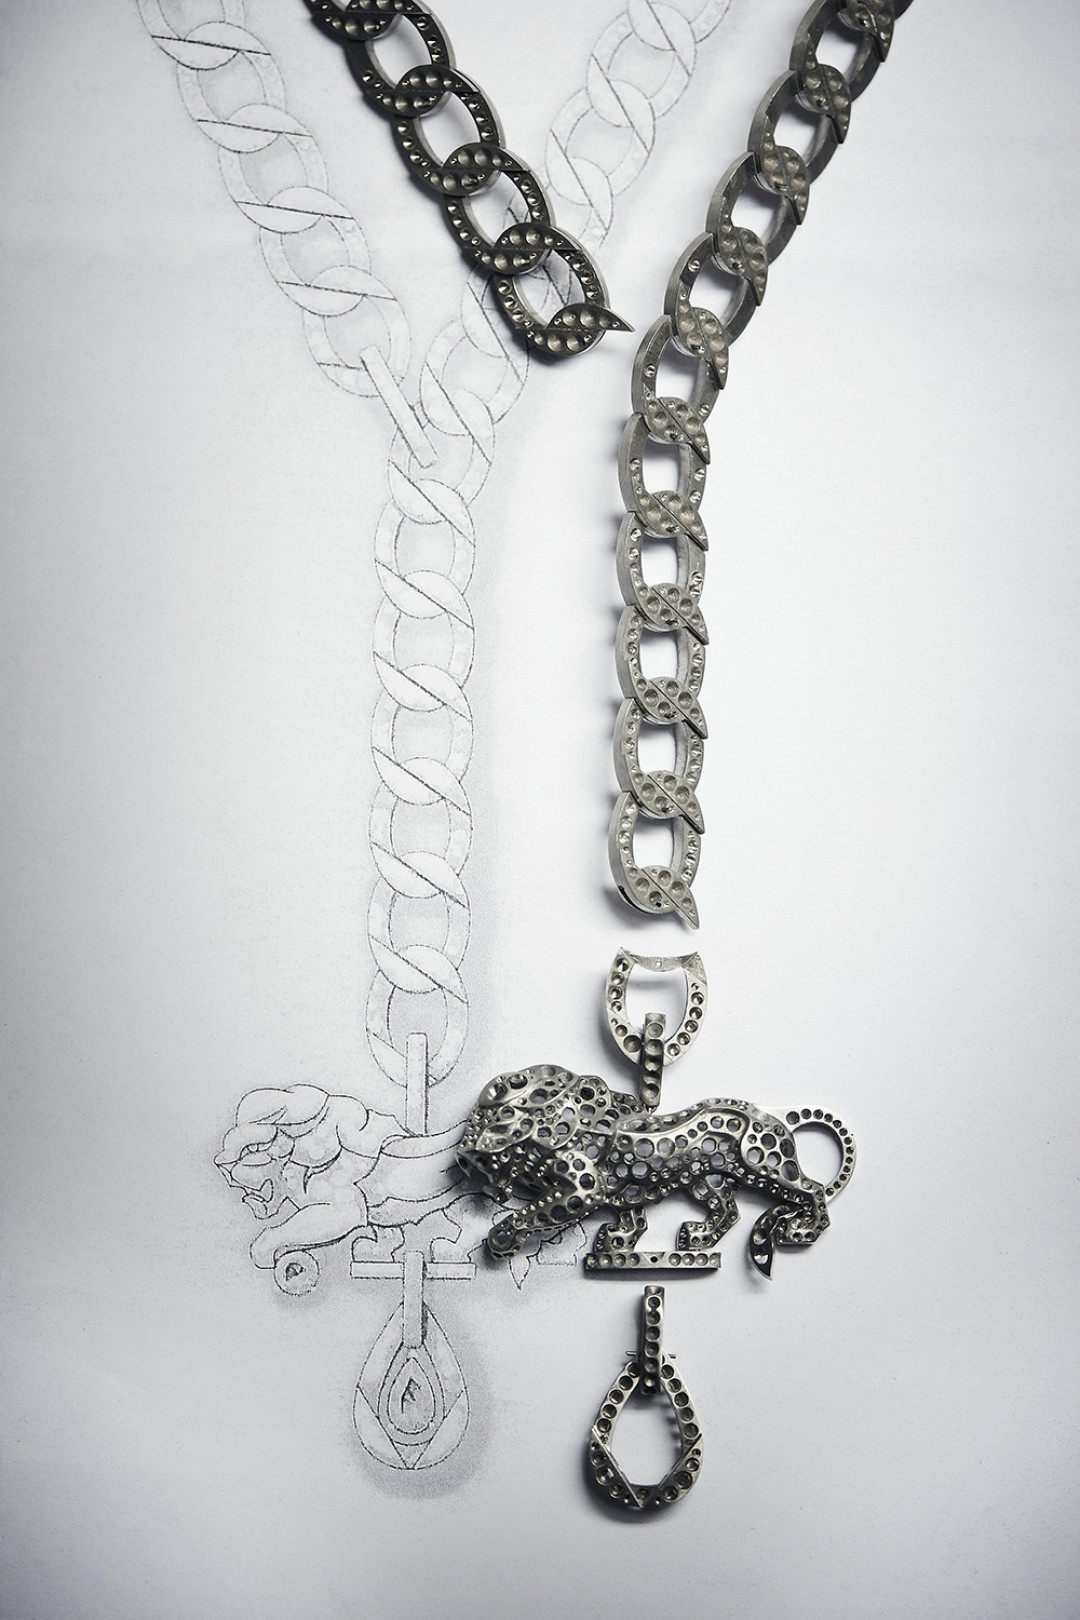 Work on the pieces from the L'ESPRIT DU LION High Jewelry collection in the CHANEL workshop, 18 Place Vendôme, Paris - Detail of the necklace before setting.